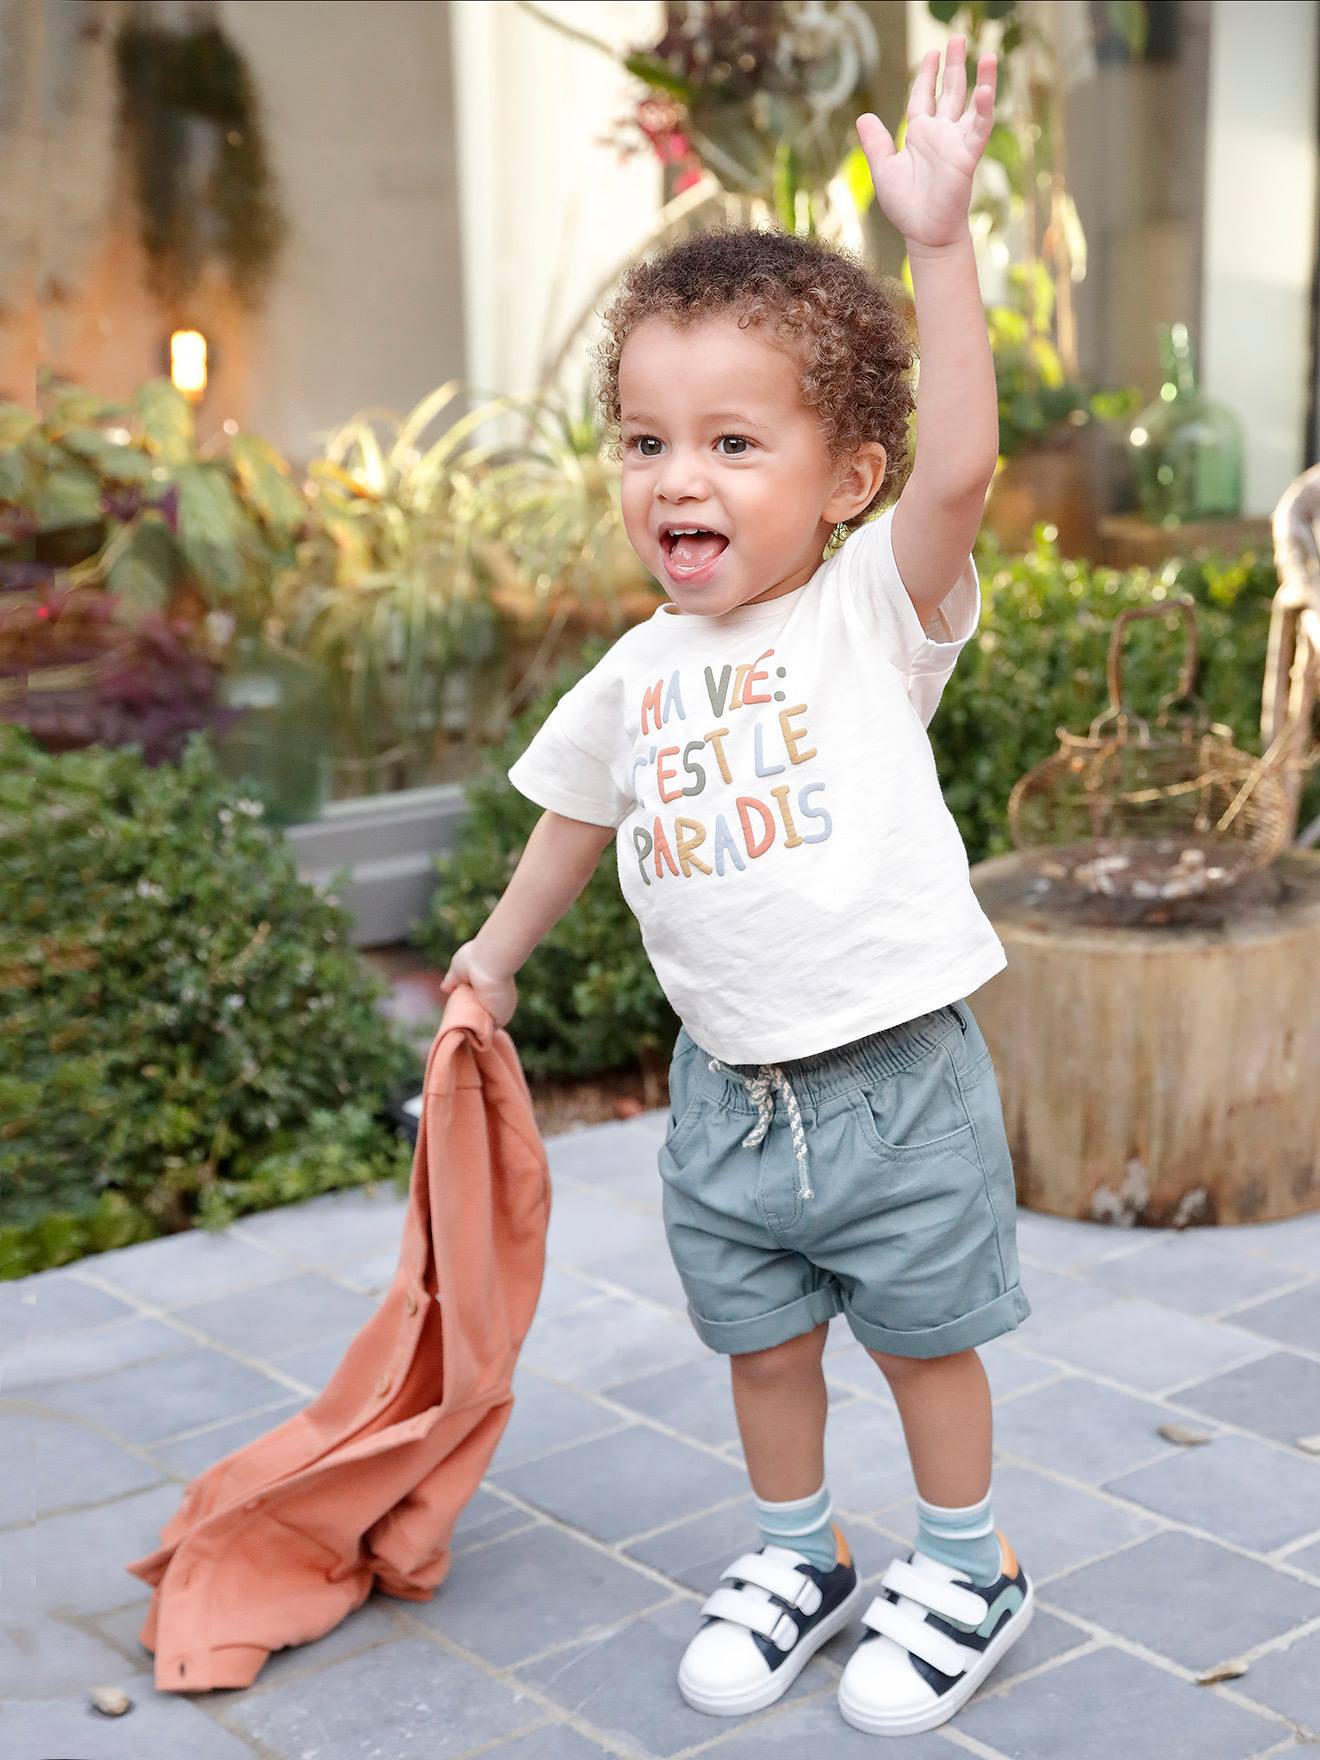 Twill Shorts with Elasticated Waistband, for Baby Boys - grey anthracite,  Baby